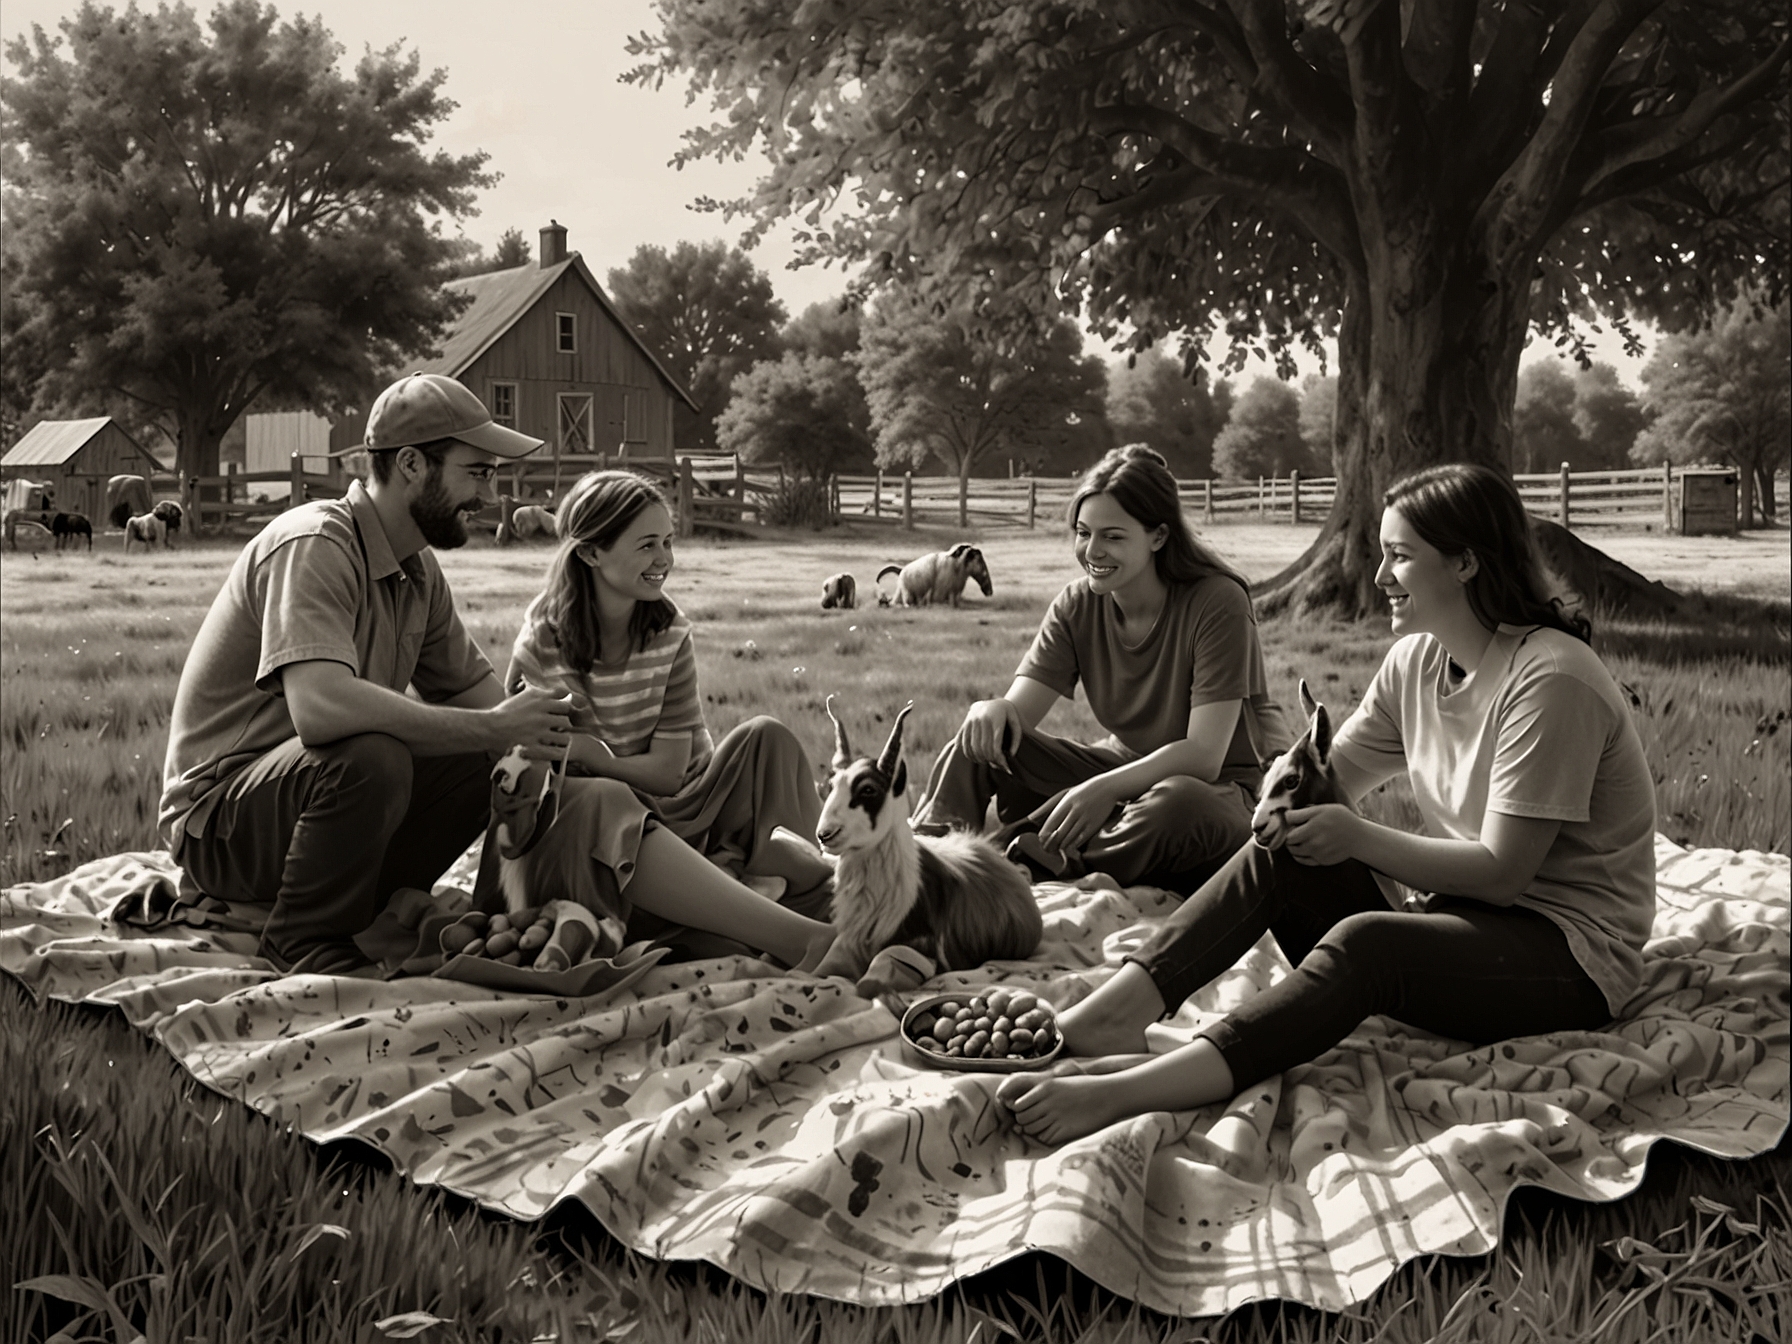 Families spread out on blankets, enjoying their picnics with playful goats wandering around seeking snacks and pats, creating a lively and heartwarming atmosphere at the farm.